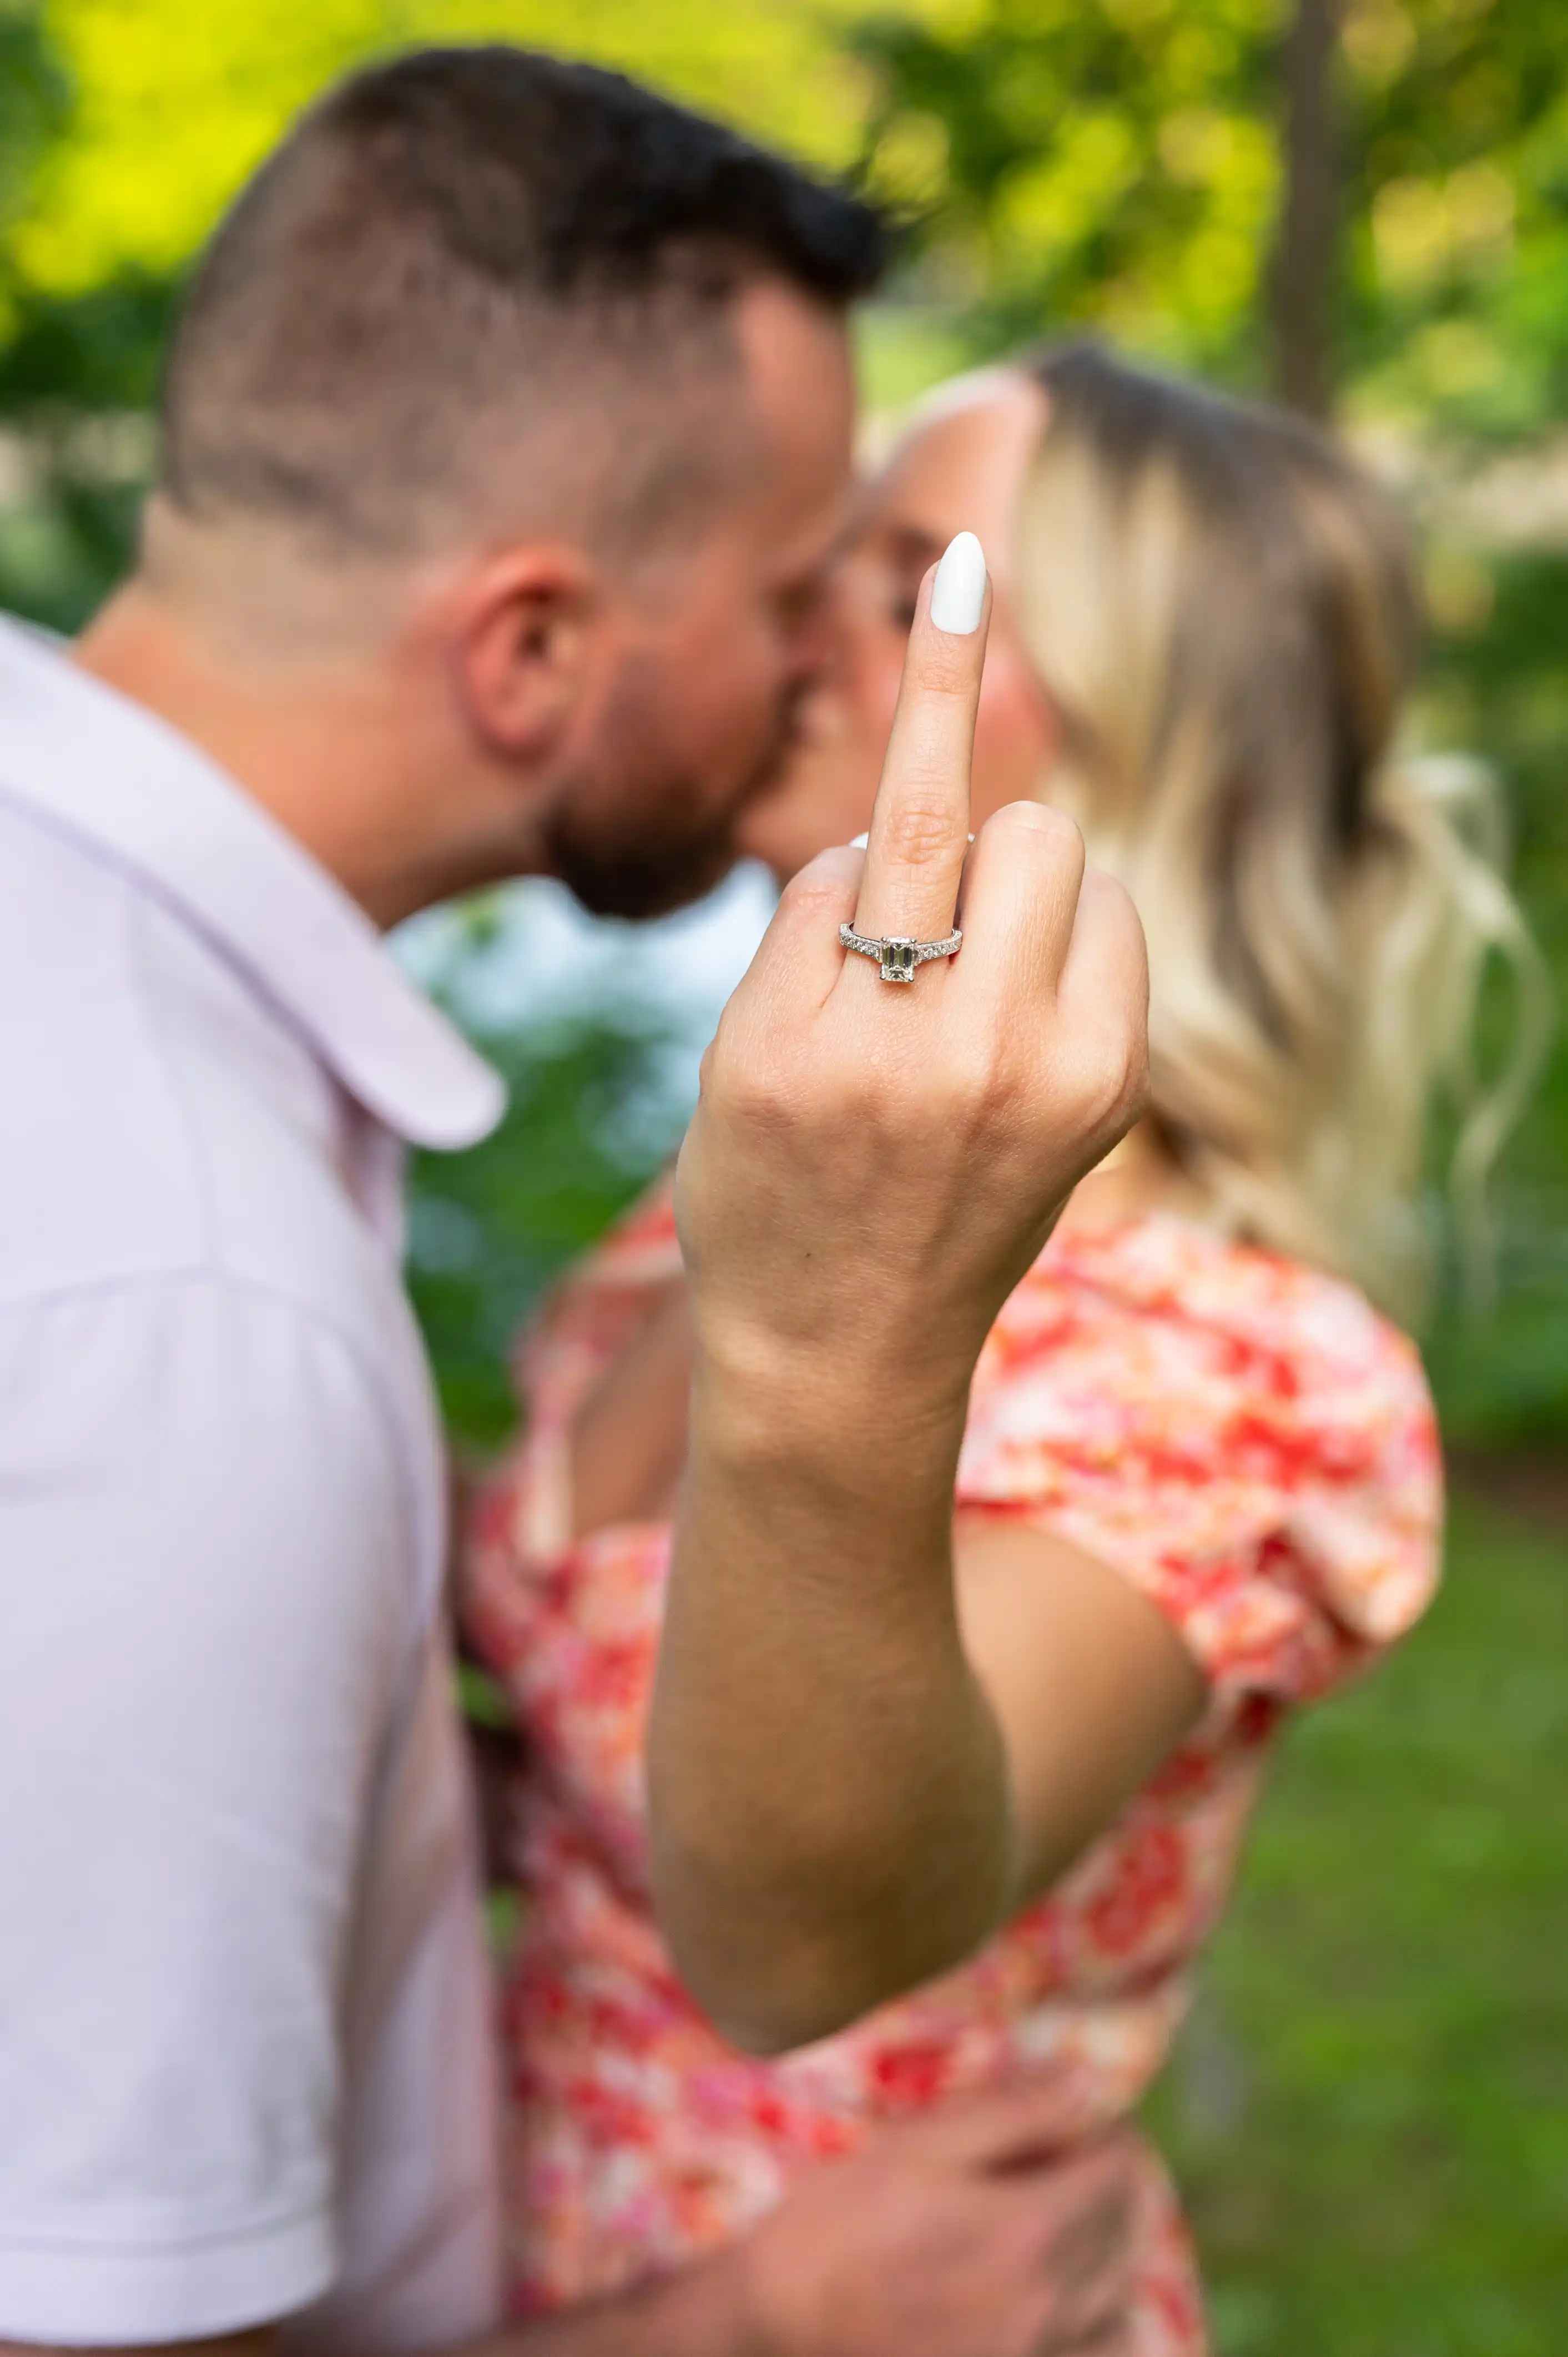 Couple sharing an intimate forehead touch with blurred greenery in the background.